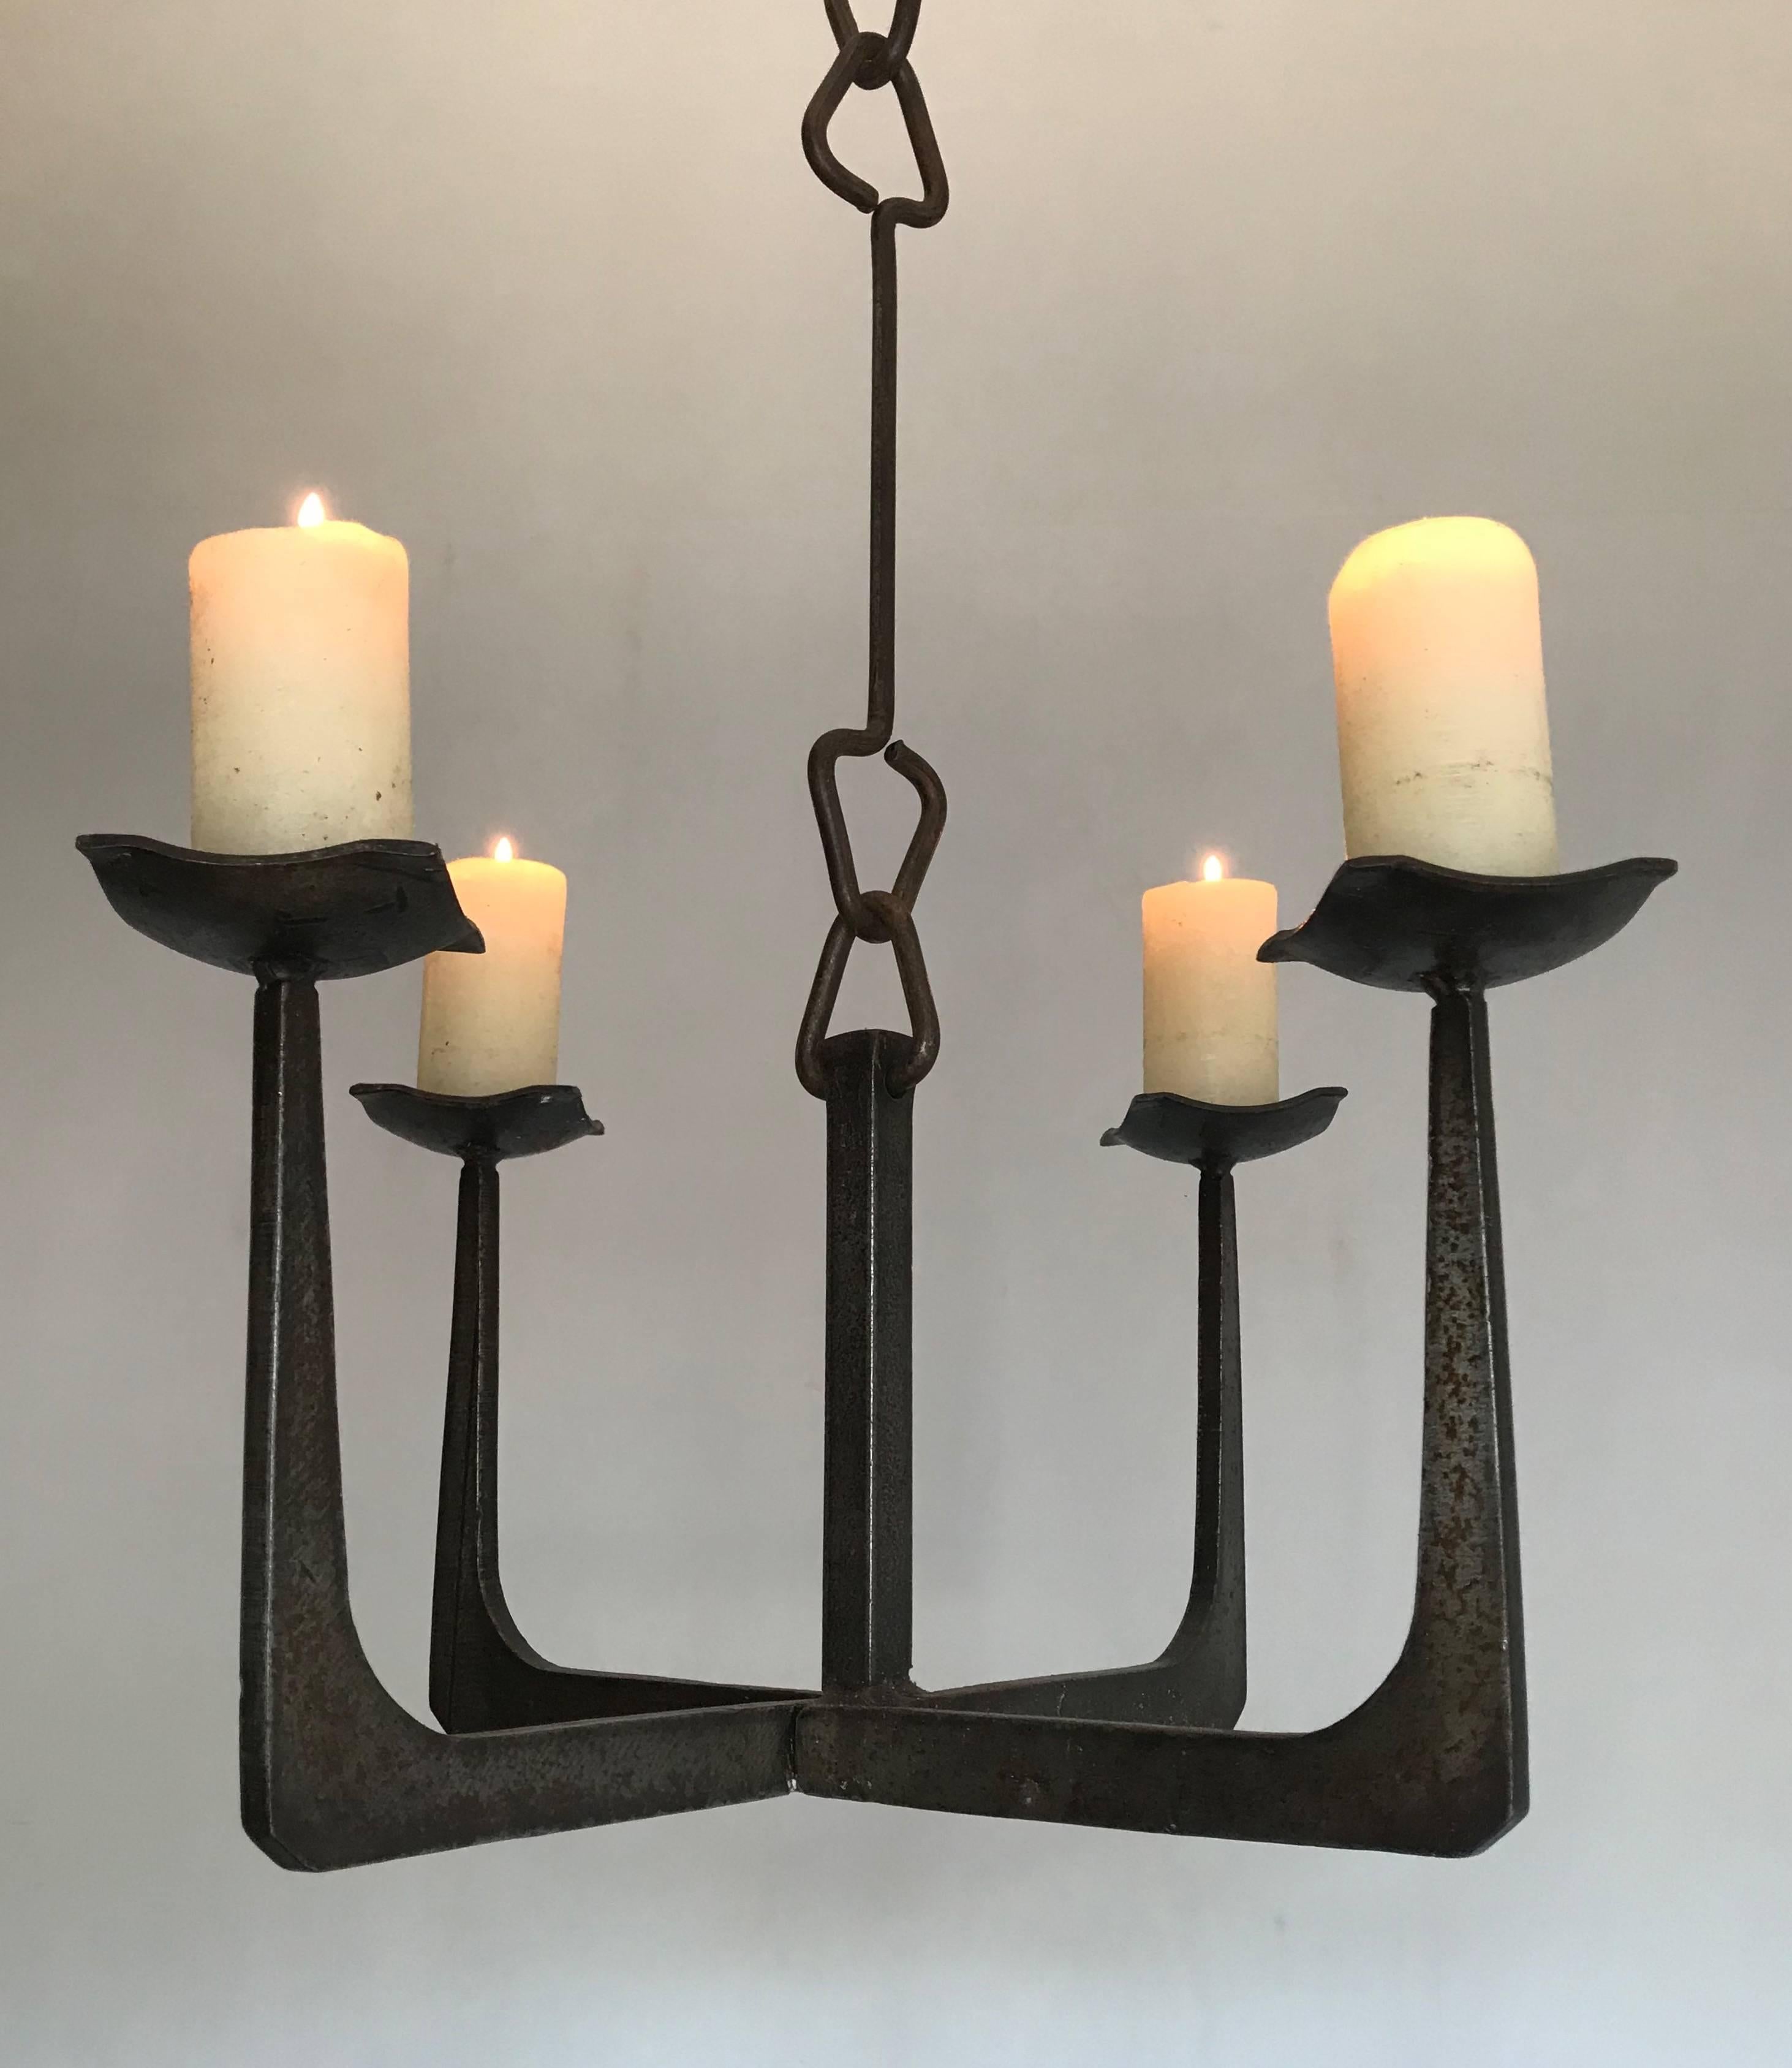 All-handcrafted, angular design candle pendant light.

This sleek & timeless candle chandelier of practical size could be the perfect lighting solution to a space that needs a special atmosphere. The angular design will make this Northern European